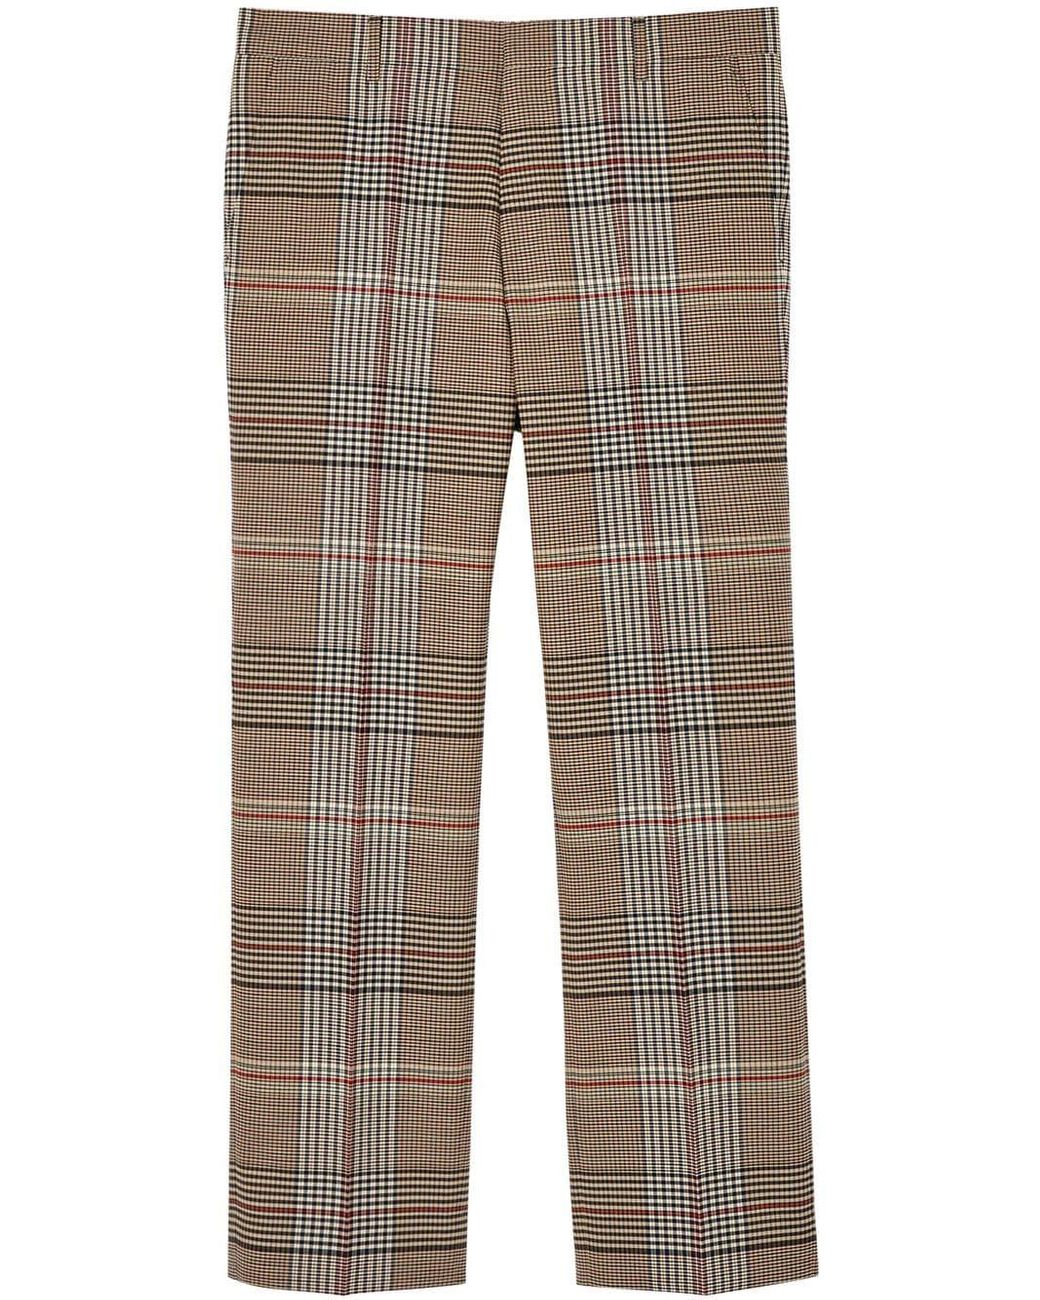 Burberry Check Wool Tailored Trousers for Men - Save 7% - Lyst